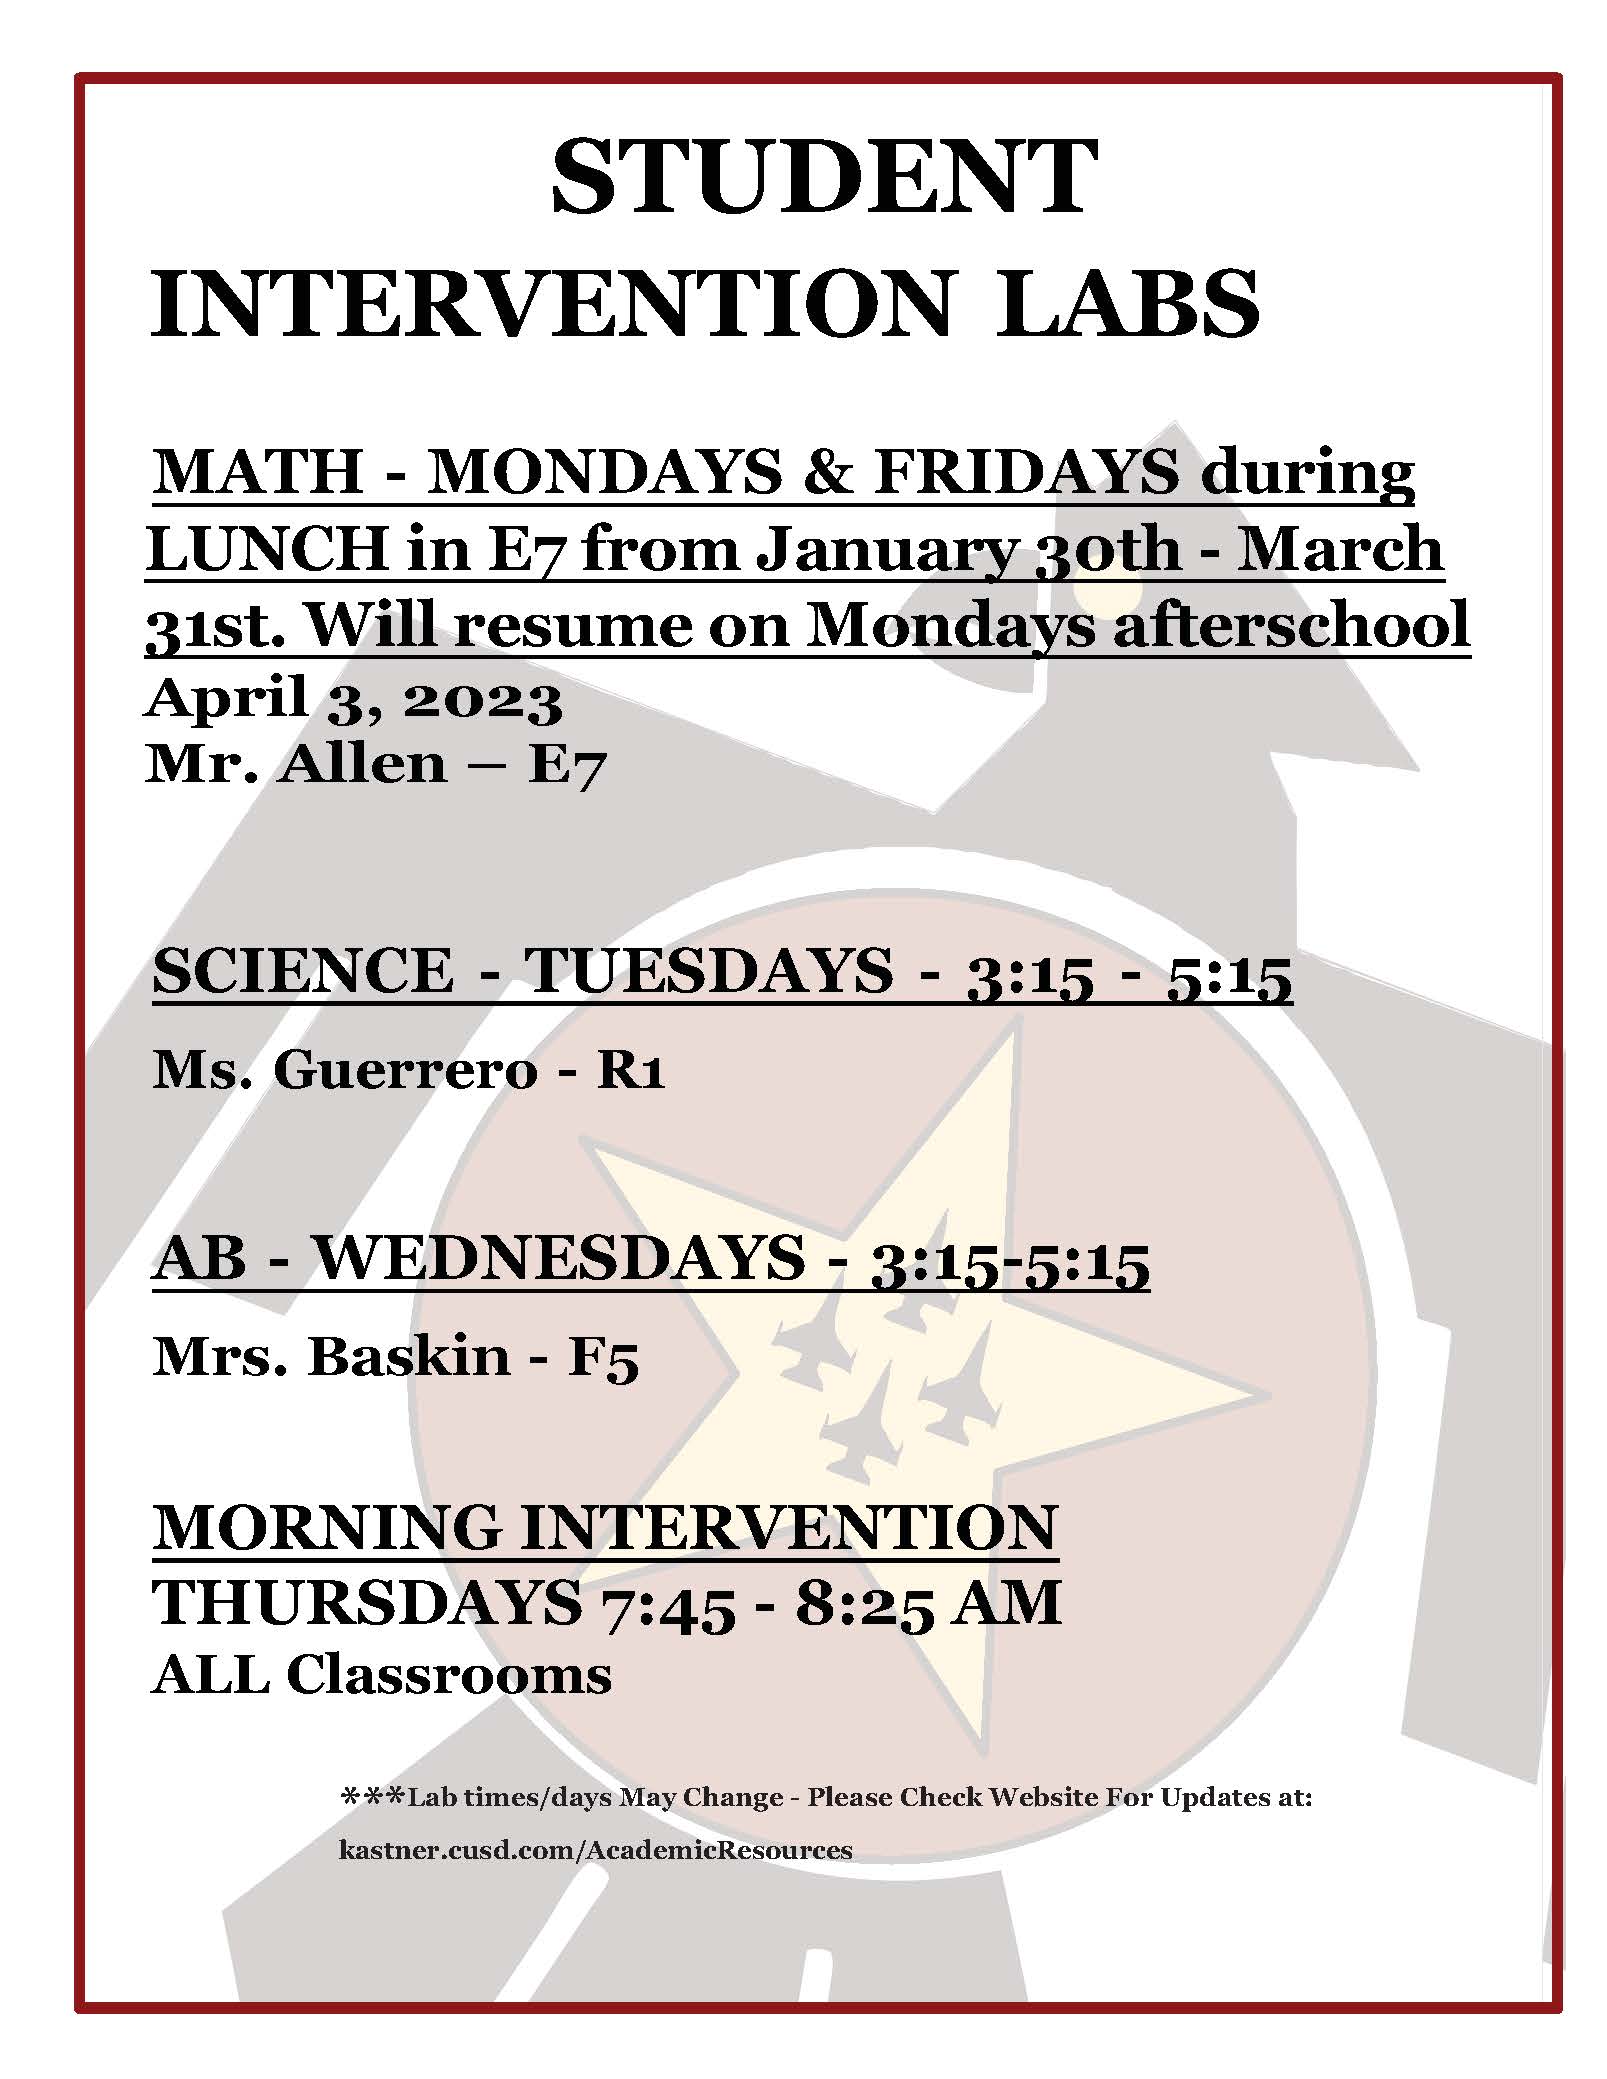 afterschool labs dates and times